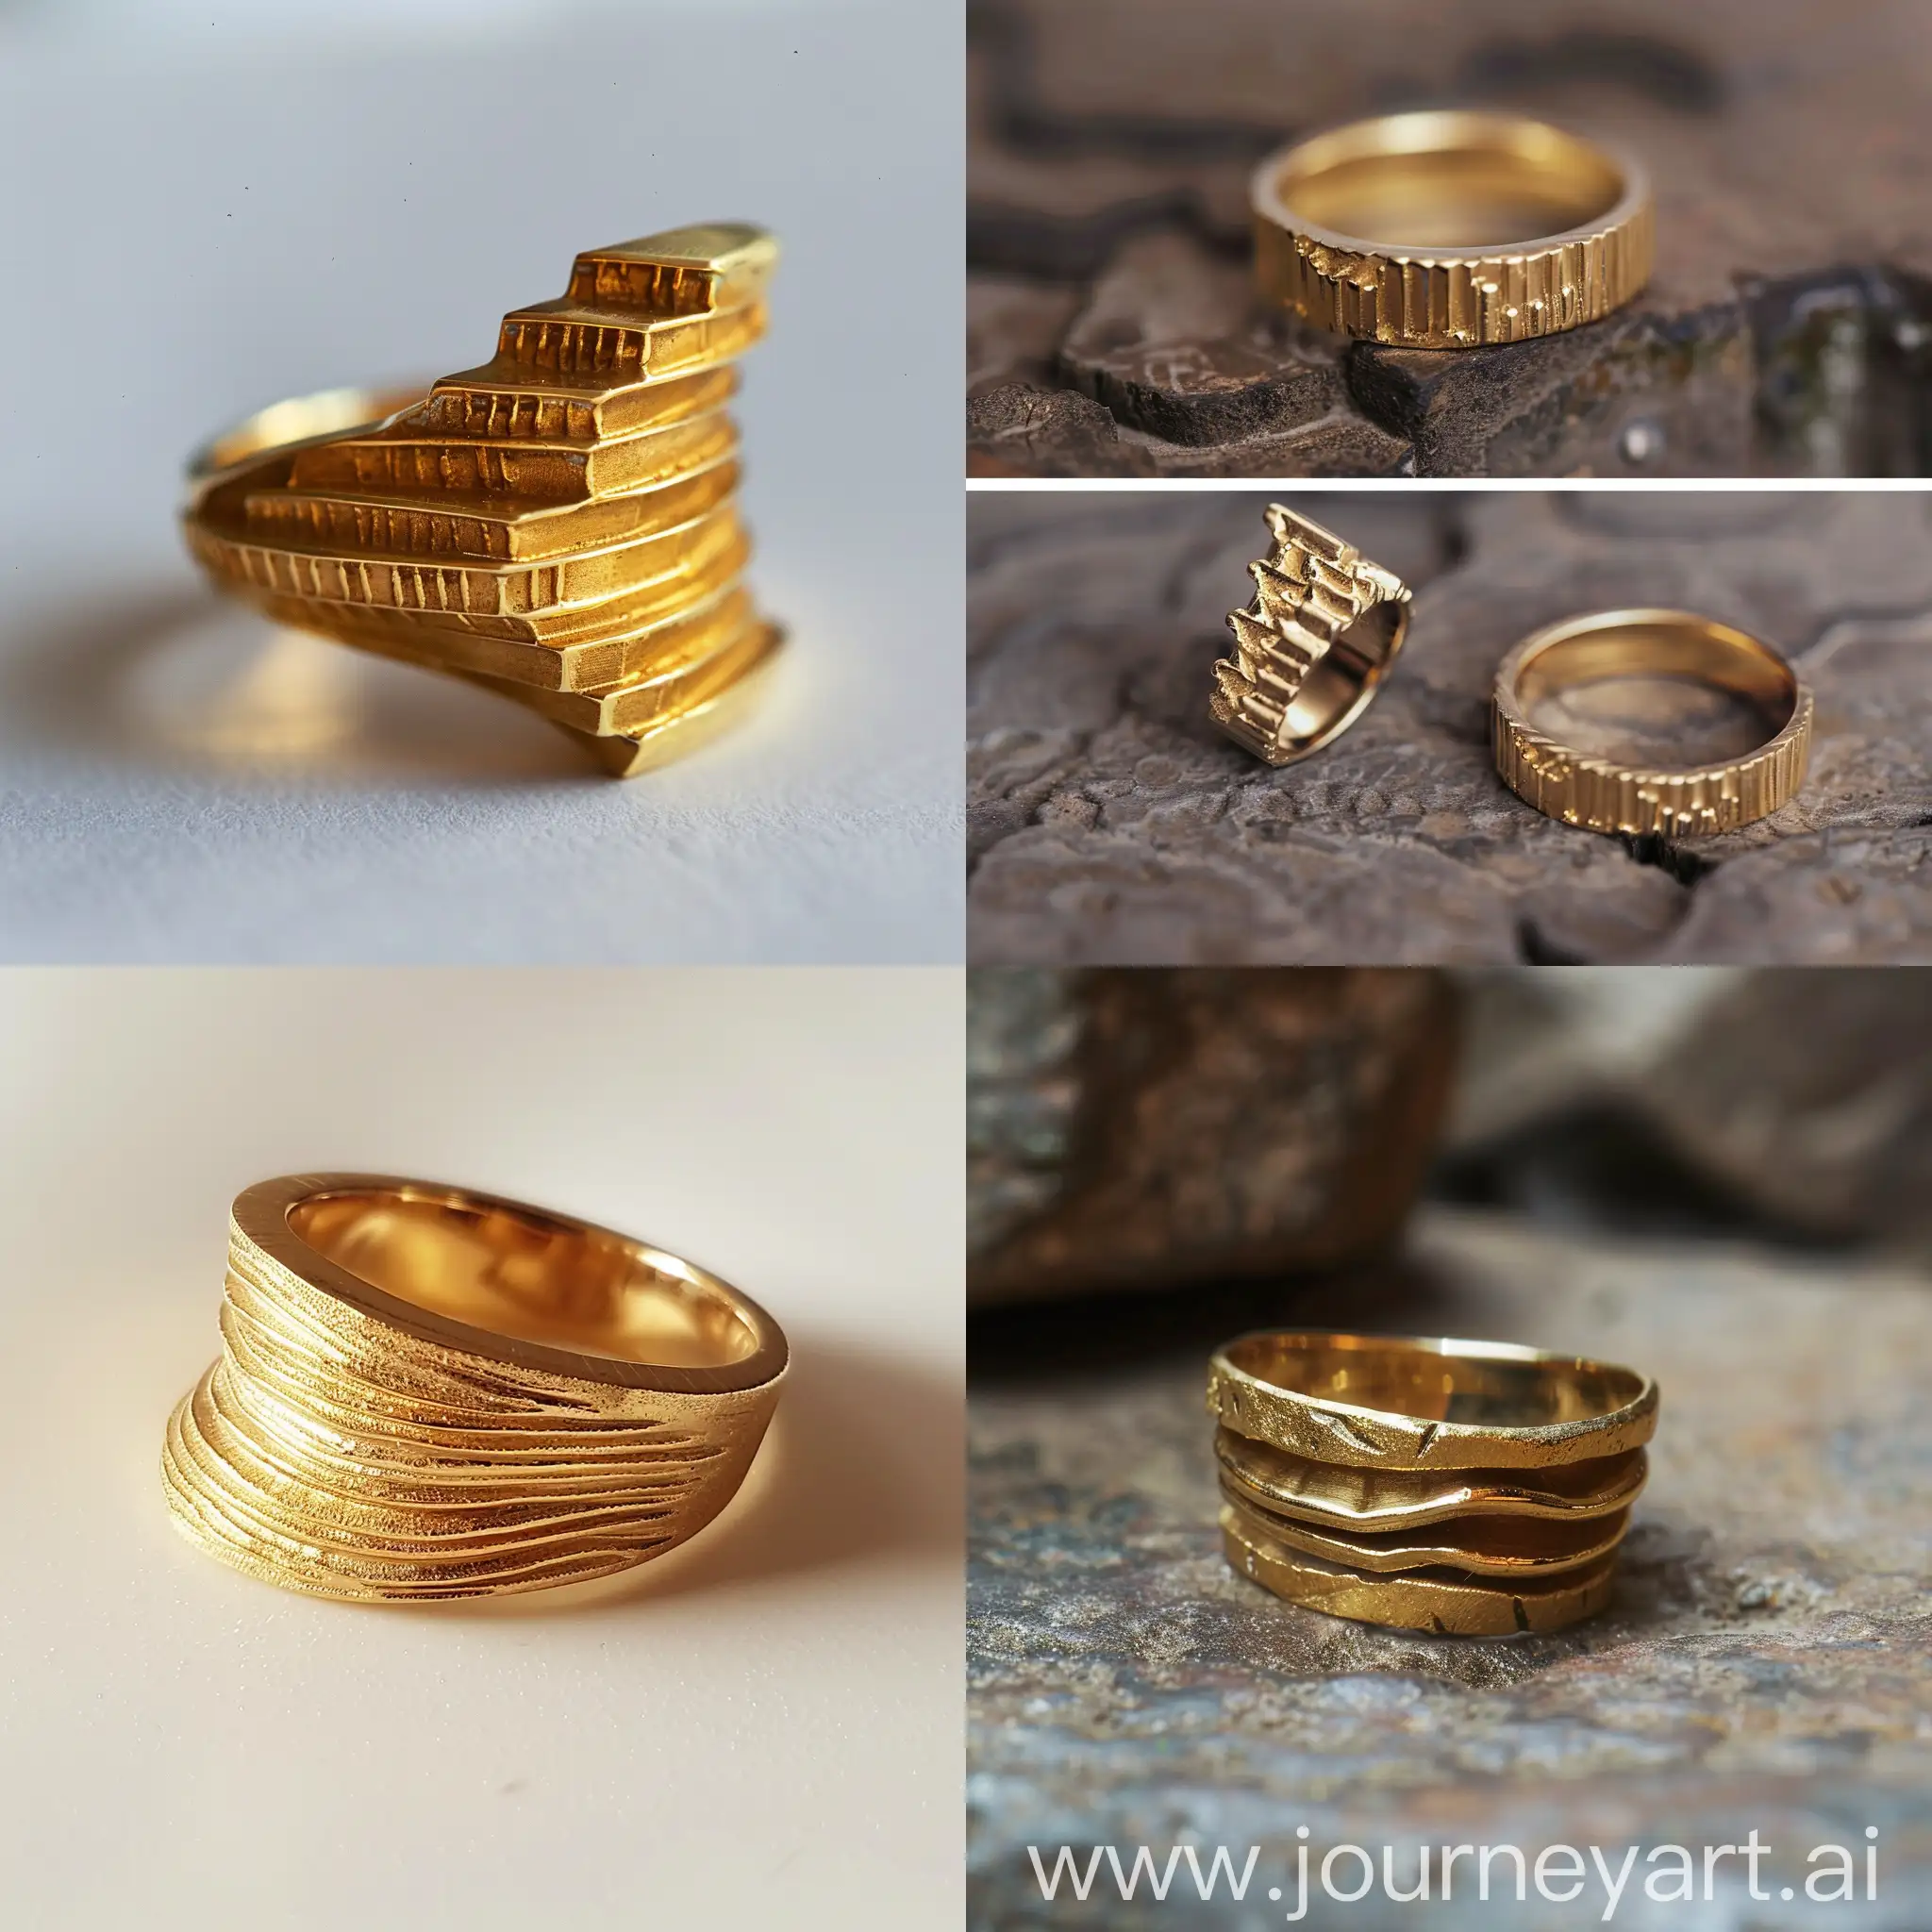 Terrace-Farming-Inspired-Gold-Ring-Design-with-Steps